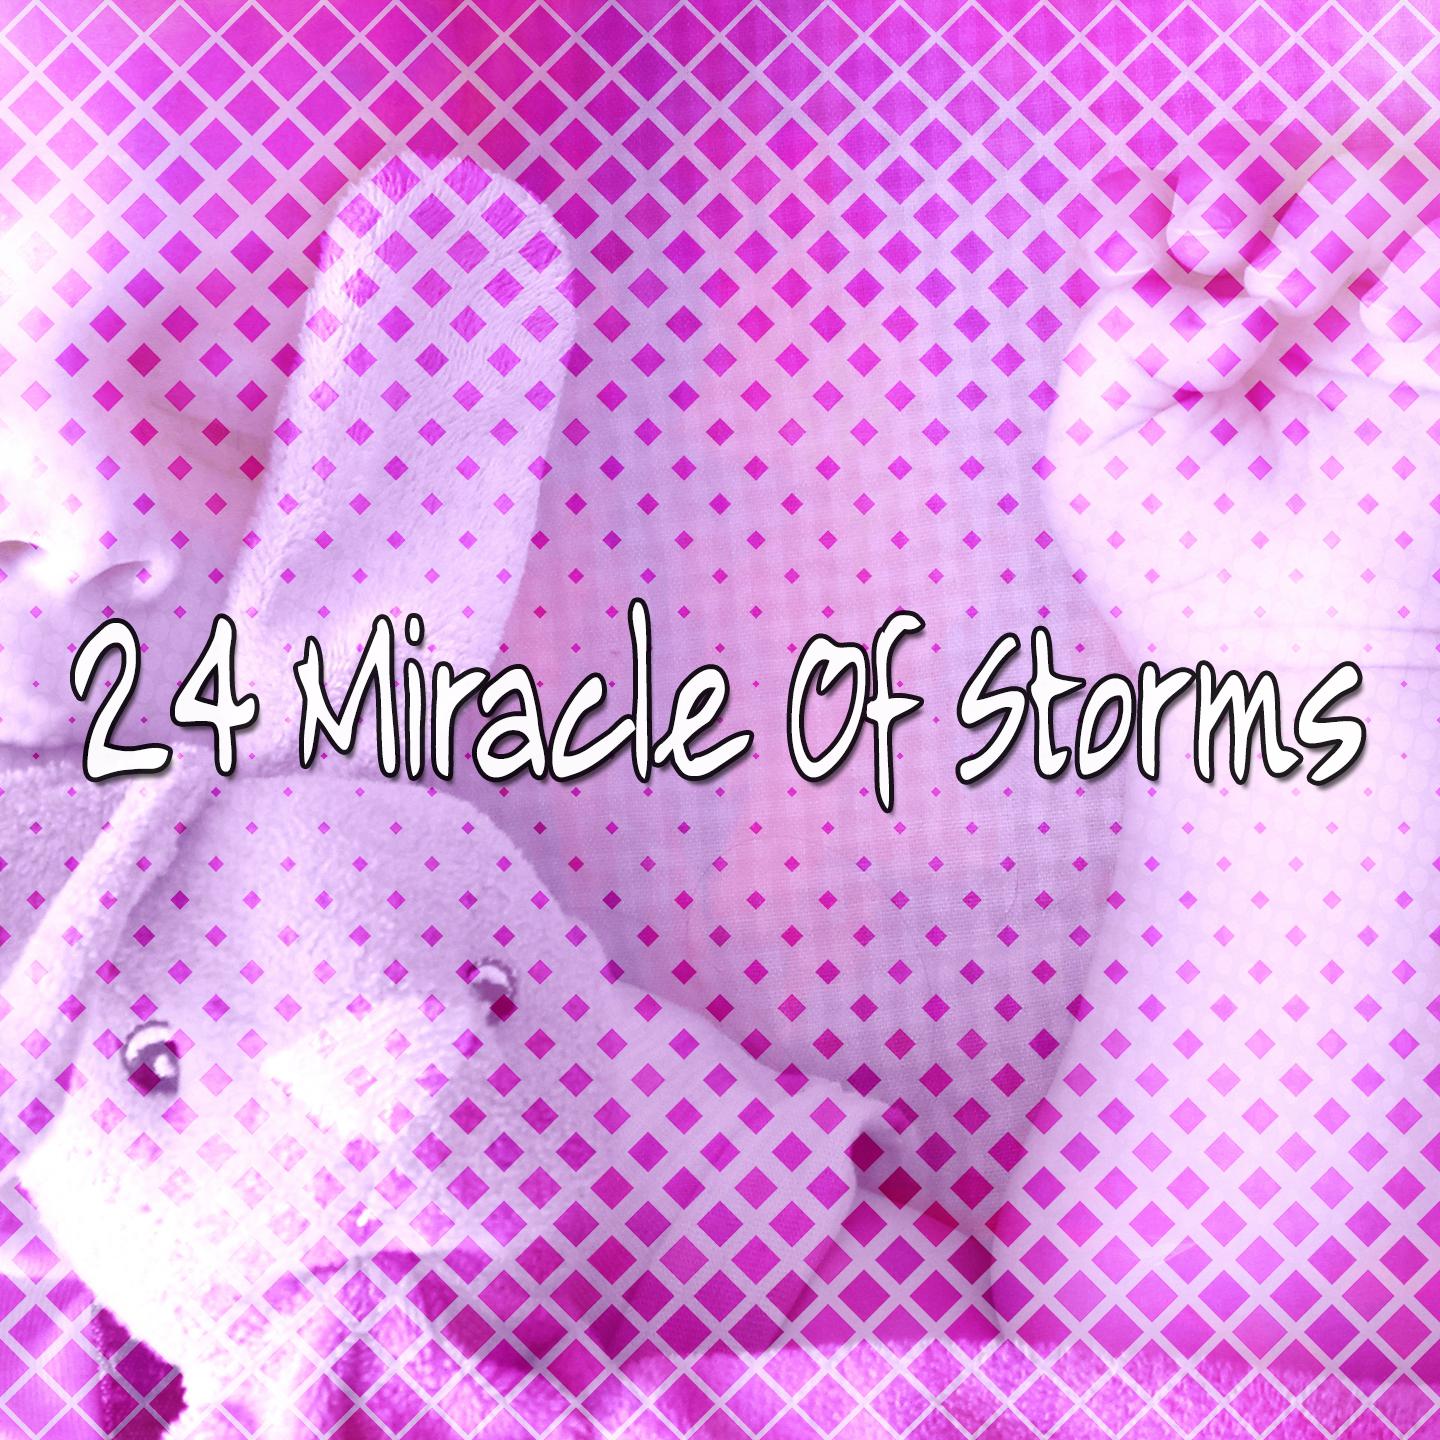 24 Miracle Of Storms